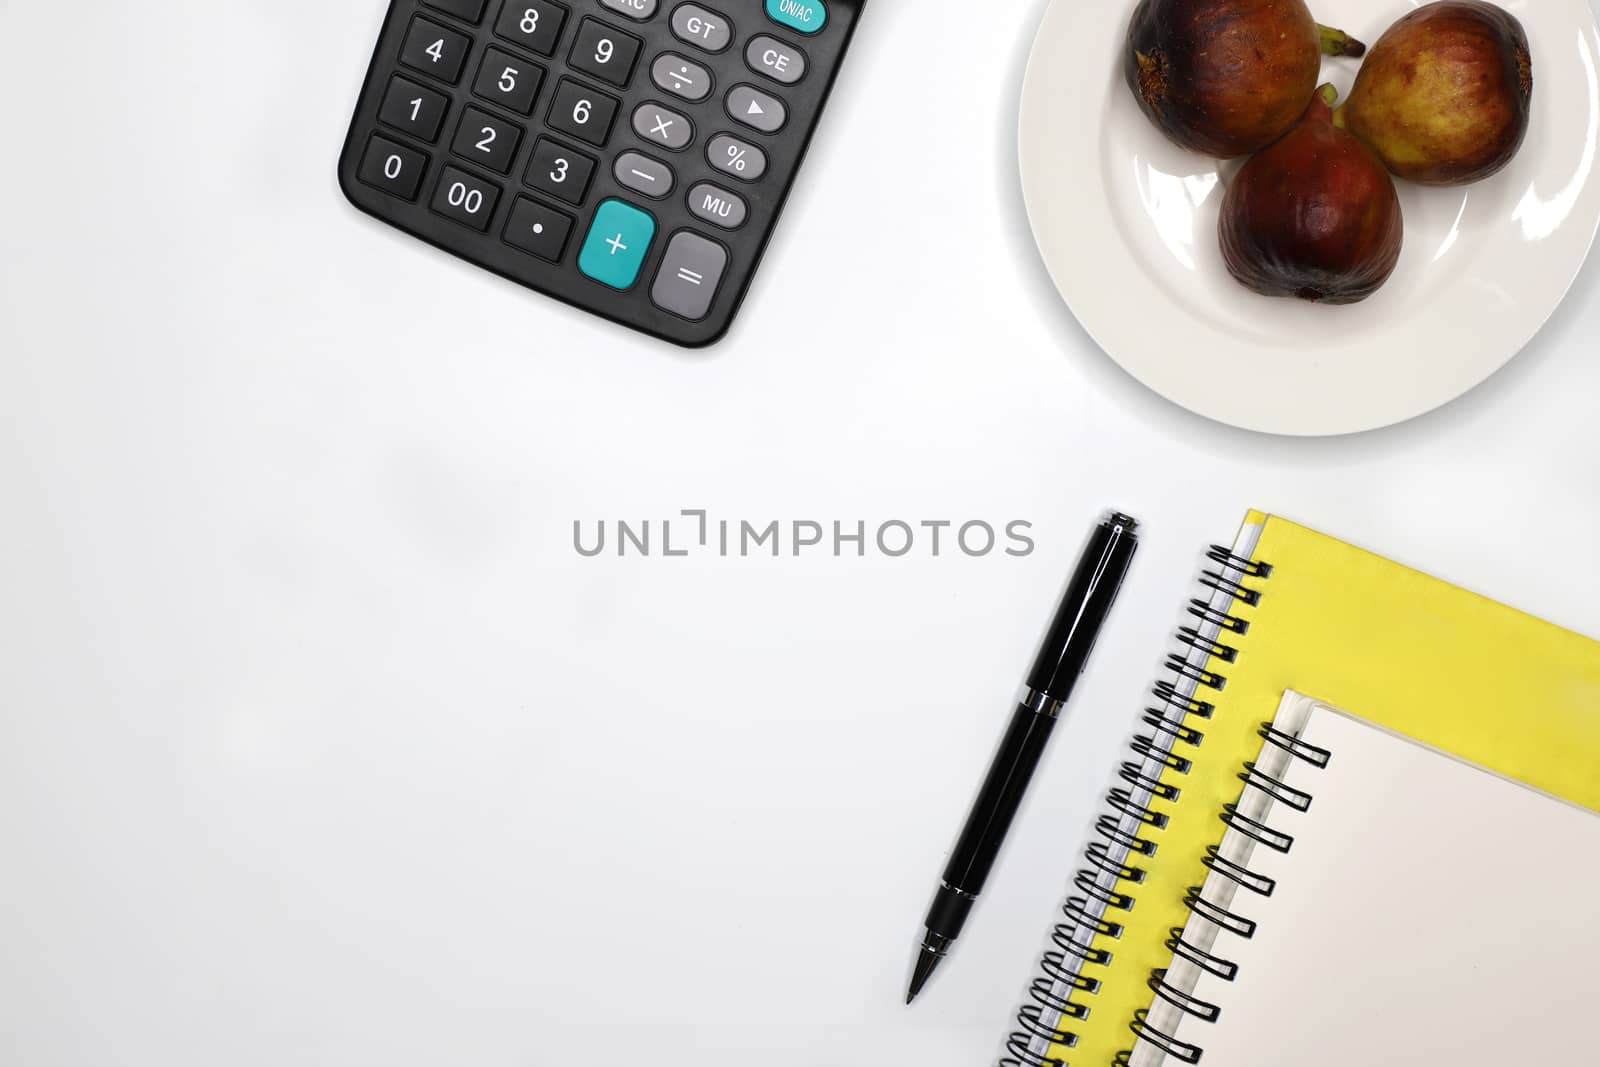 notebooks, a calculator and a pen on a desk by Nawoot